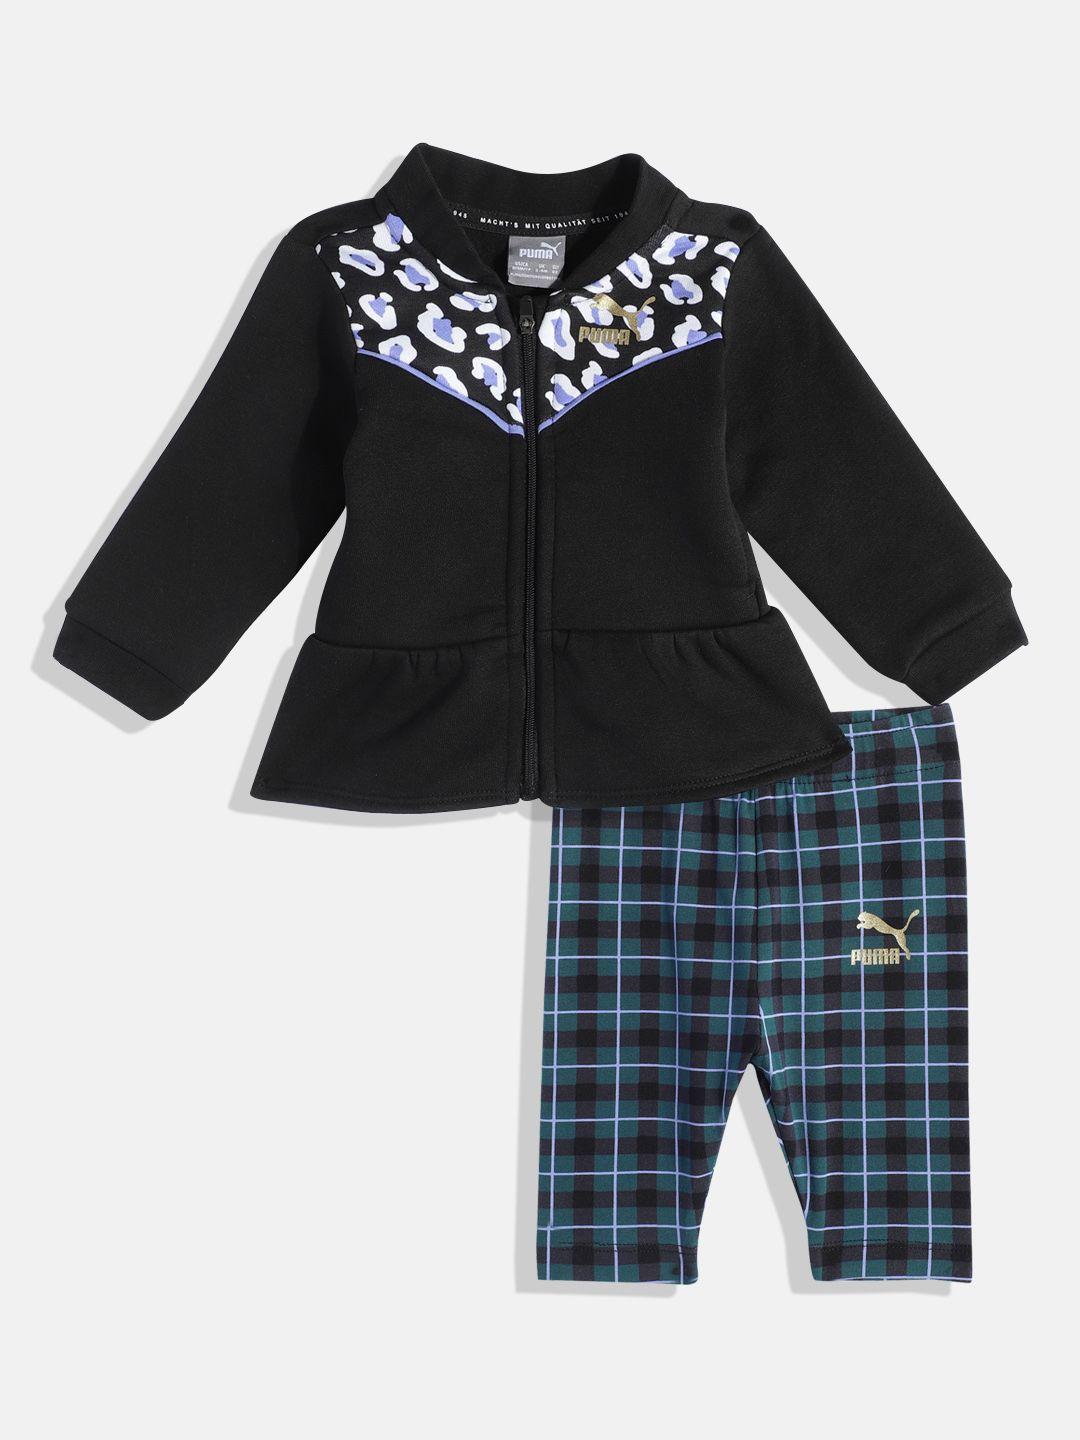 puma infant black printed peplum top with blue checked trousers